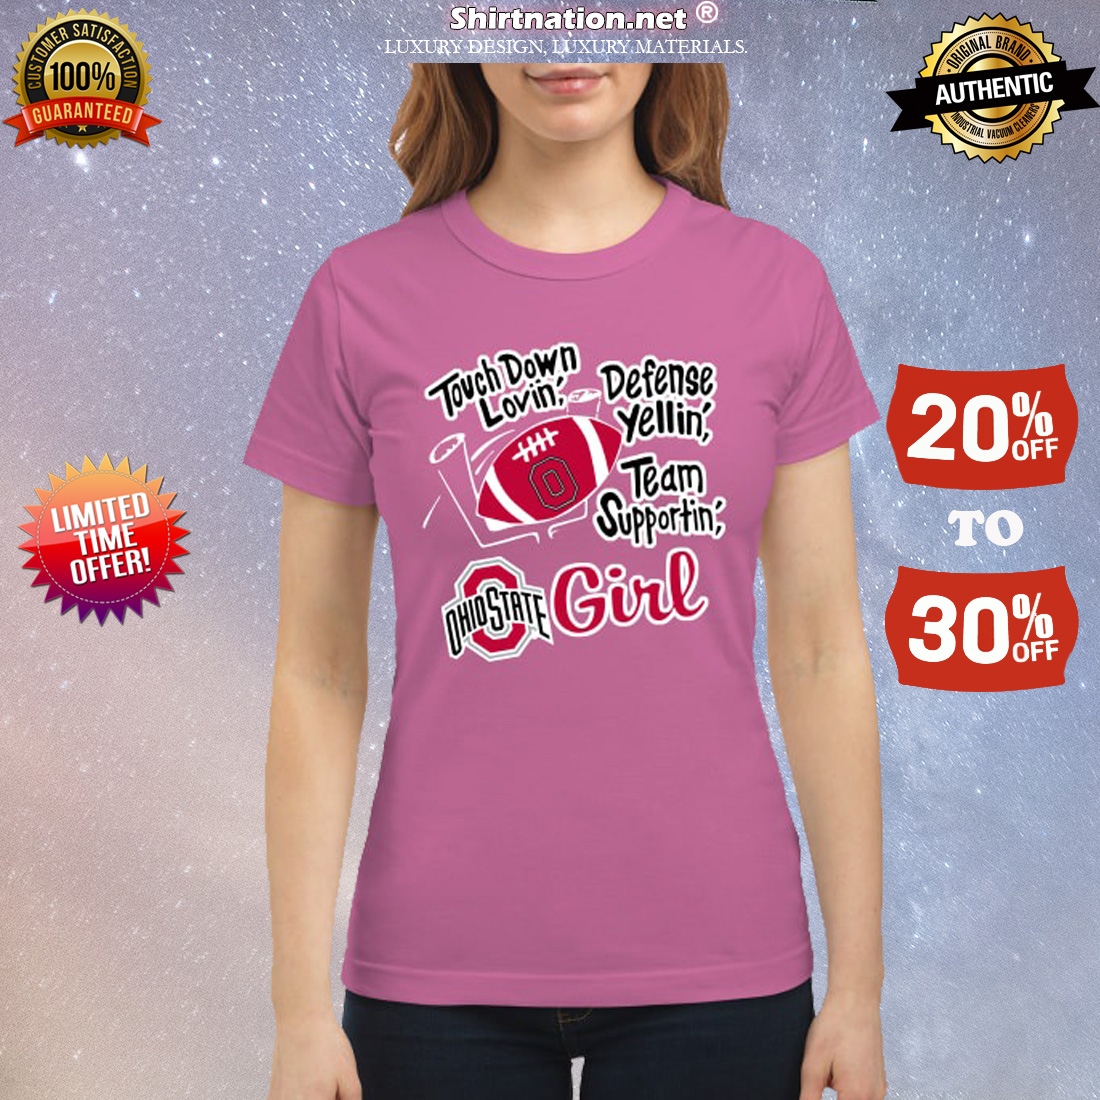 Touch down loving defense yelling team supporting Ohio State girl classic shirt